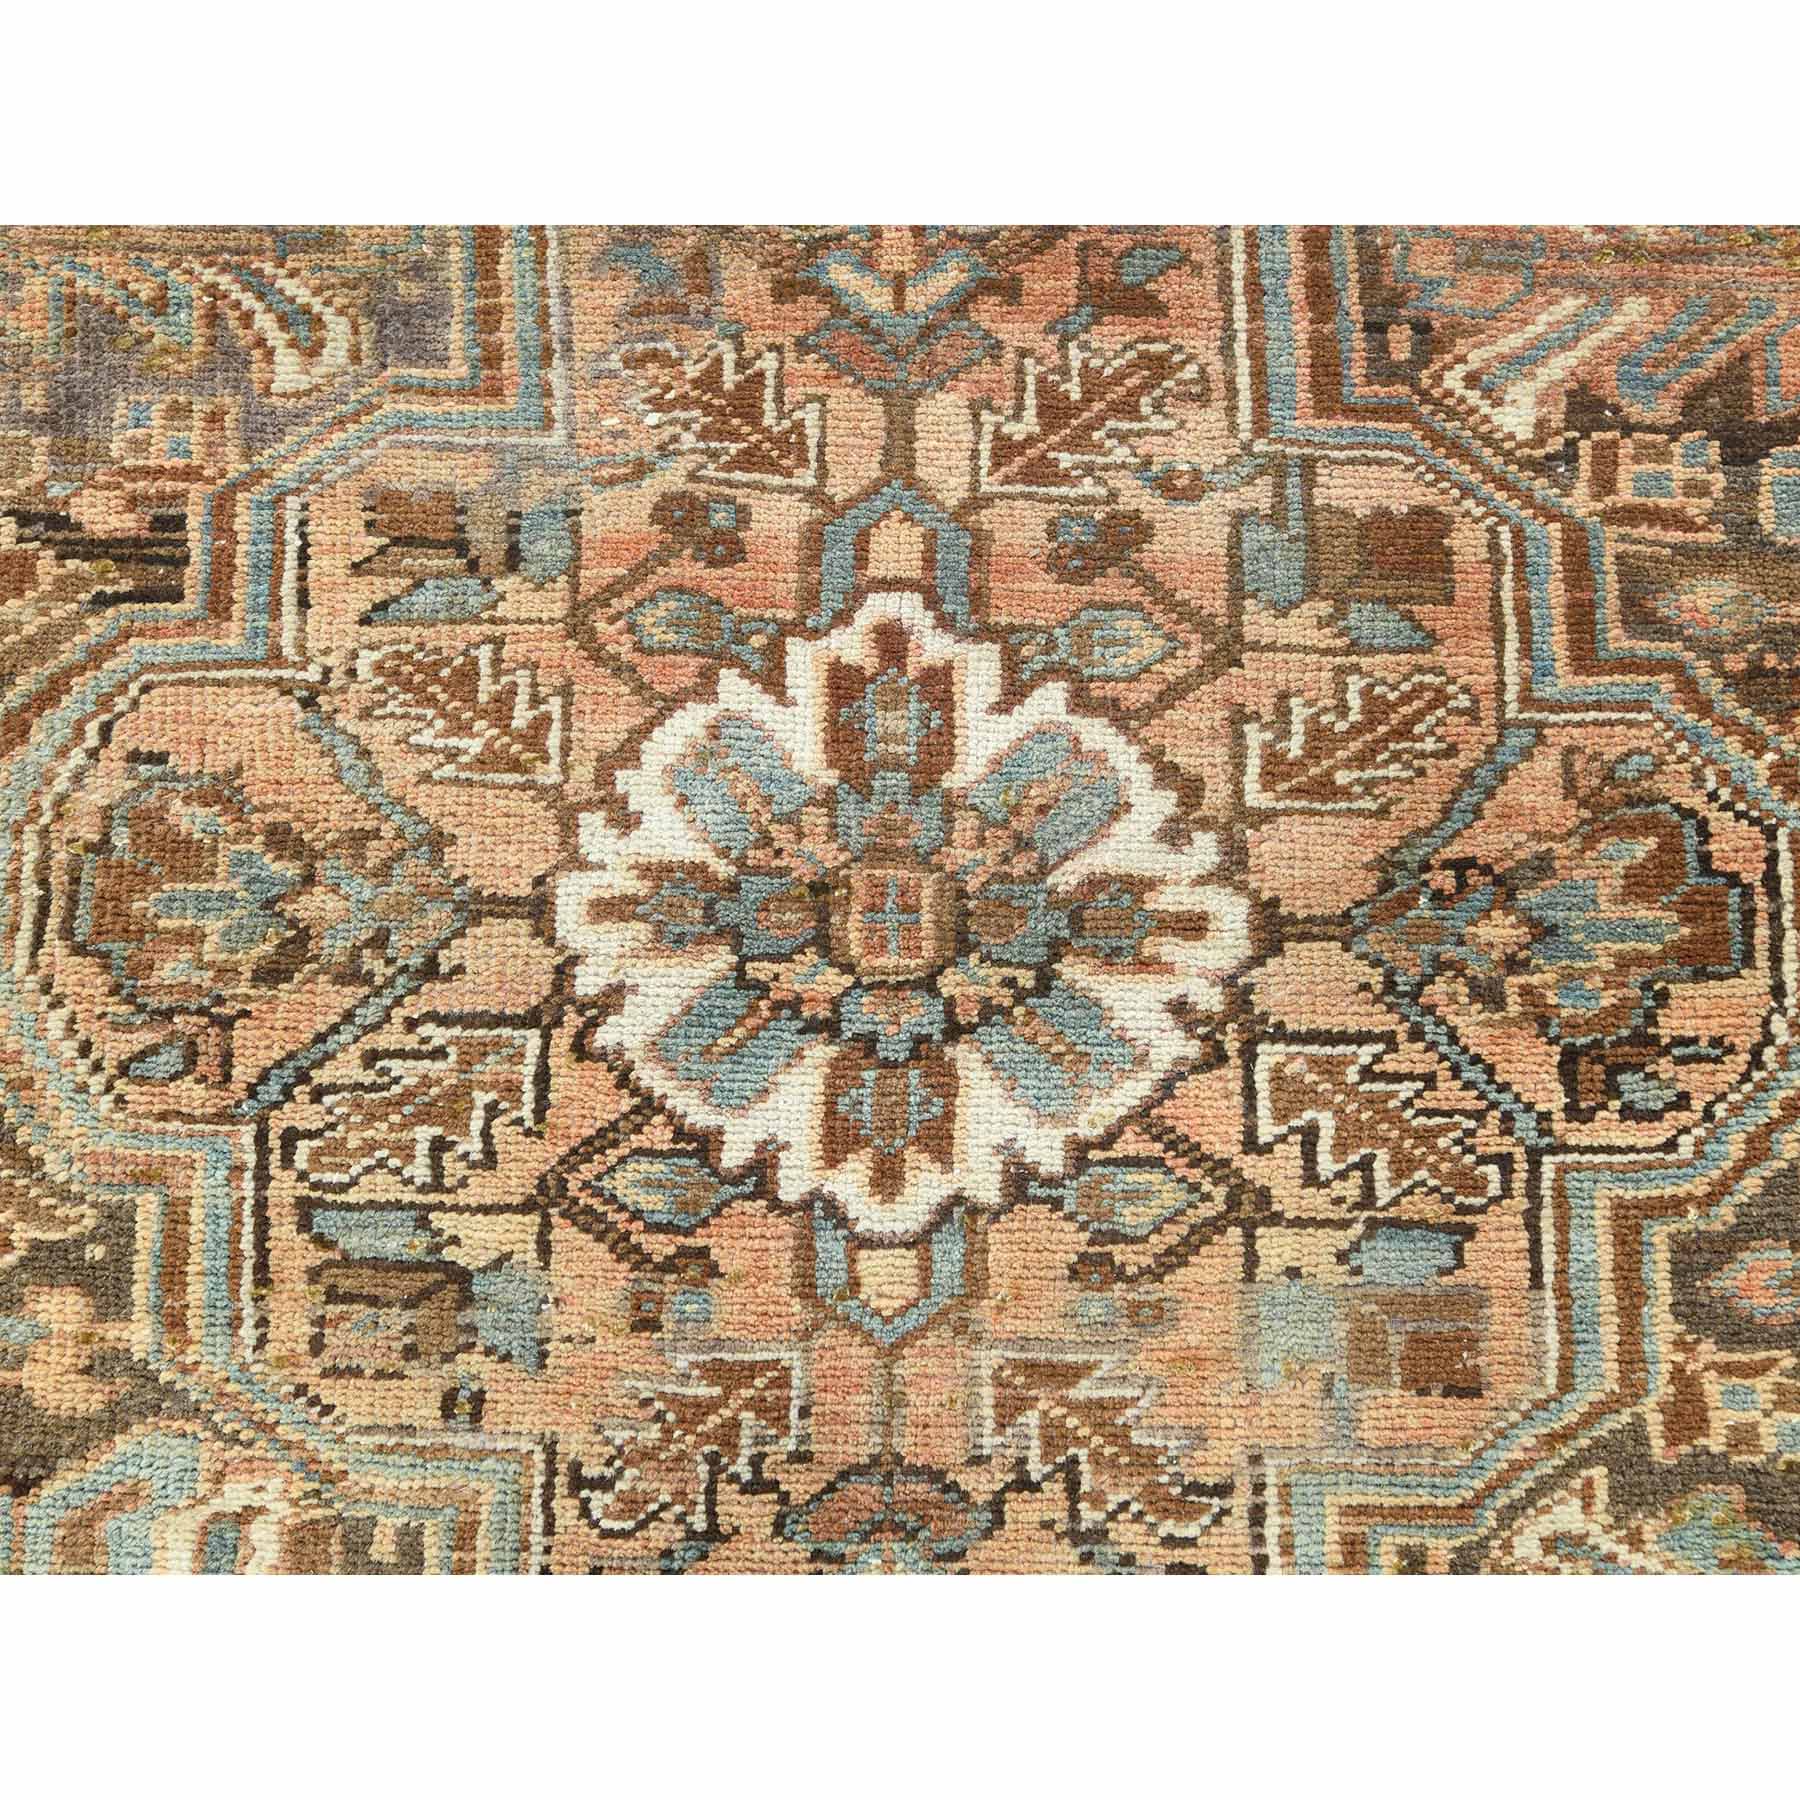 Overdyed-Vintage-Hand-Knotted-Rug-410625